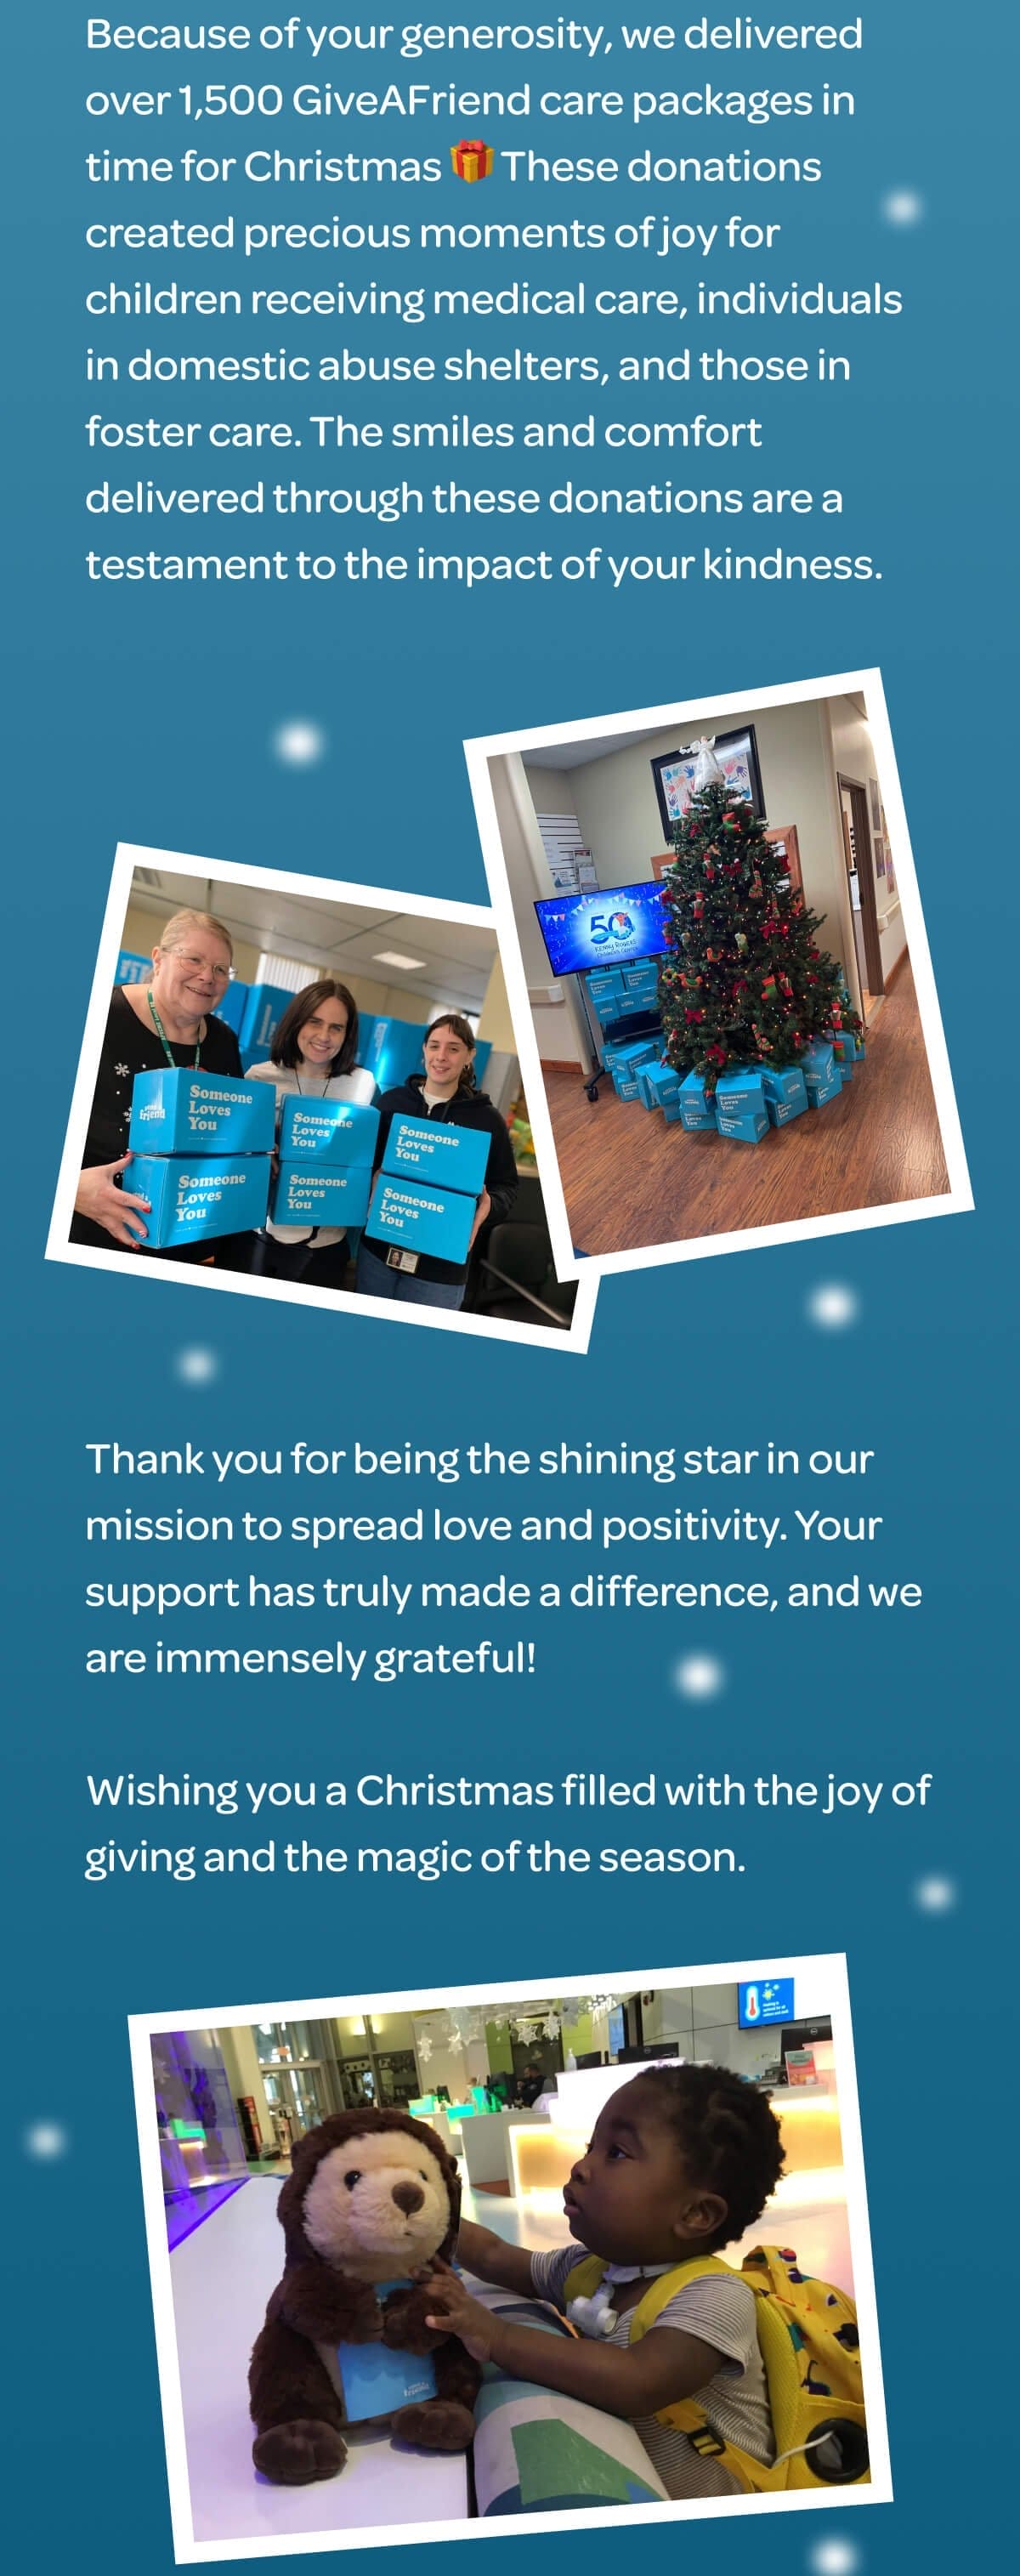 Because of your generosity, we delivered over 1,500 GiveAFriend care packages in time for Christmas 🎁 These donations created precious moments of joy for children receiving medical care, individuals in domestic abuse shelters, and those in foster care. The smiles and comfort delivered through these donations are a testament to the impact of your kindness. Thank you for being the shining star in our mission to spread love and positivity. Your support has truly made a difference, and we are immensely grateful! Wishing you a Christmas filled with the joy of giving and the magic of the season.